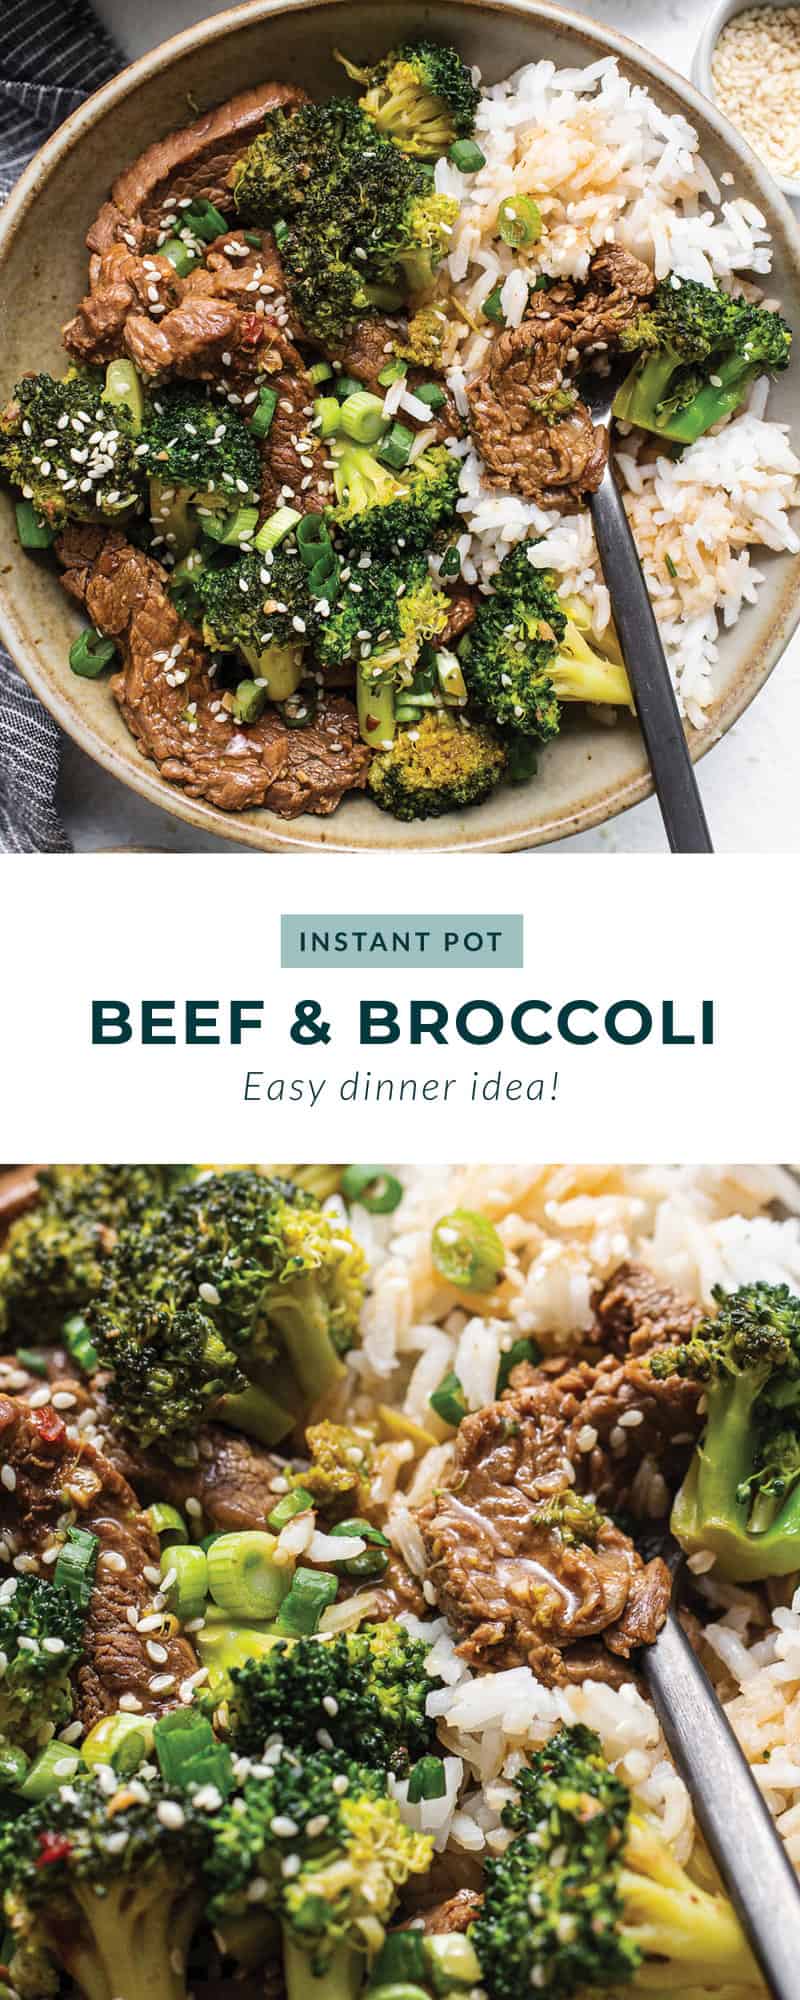 Instant Pot Beef and Broccoli (cooktime only 9 min!) - Fit Foodie Finds